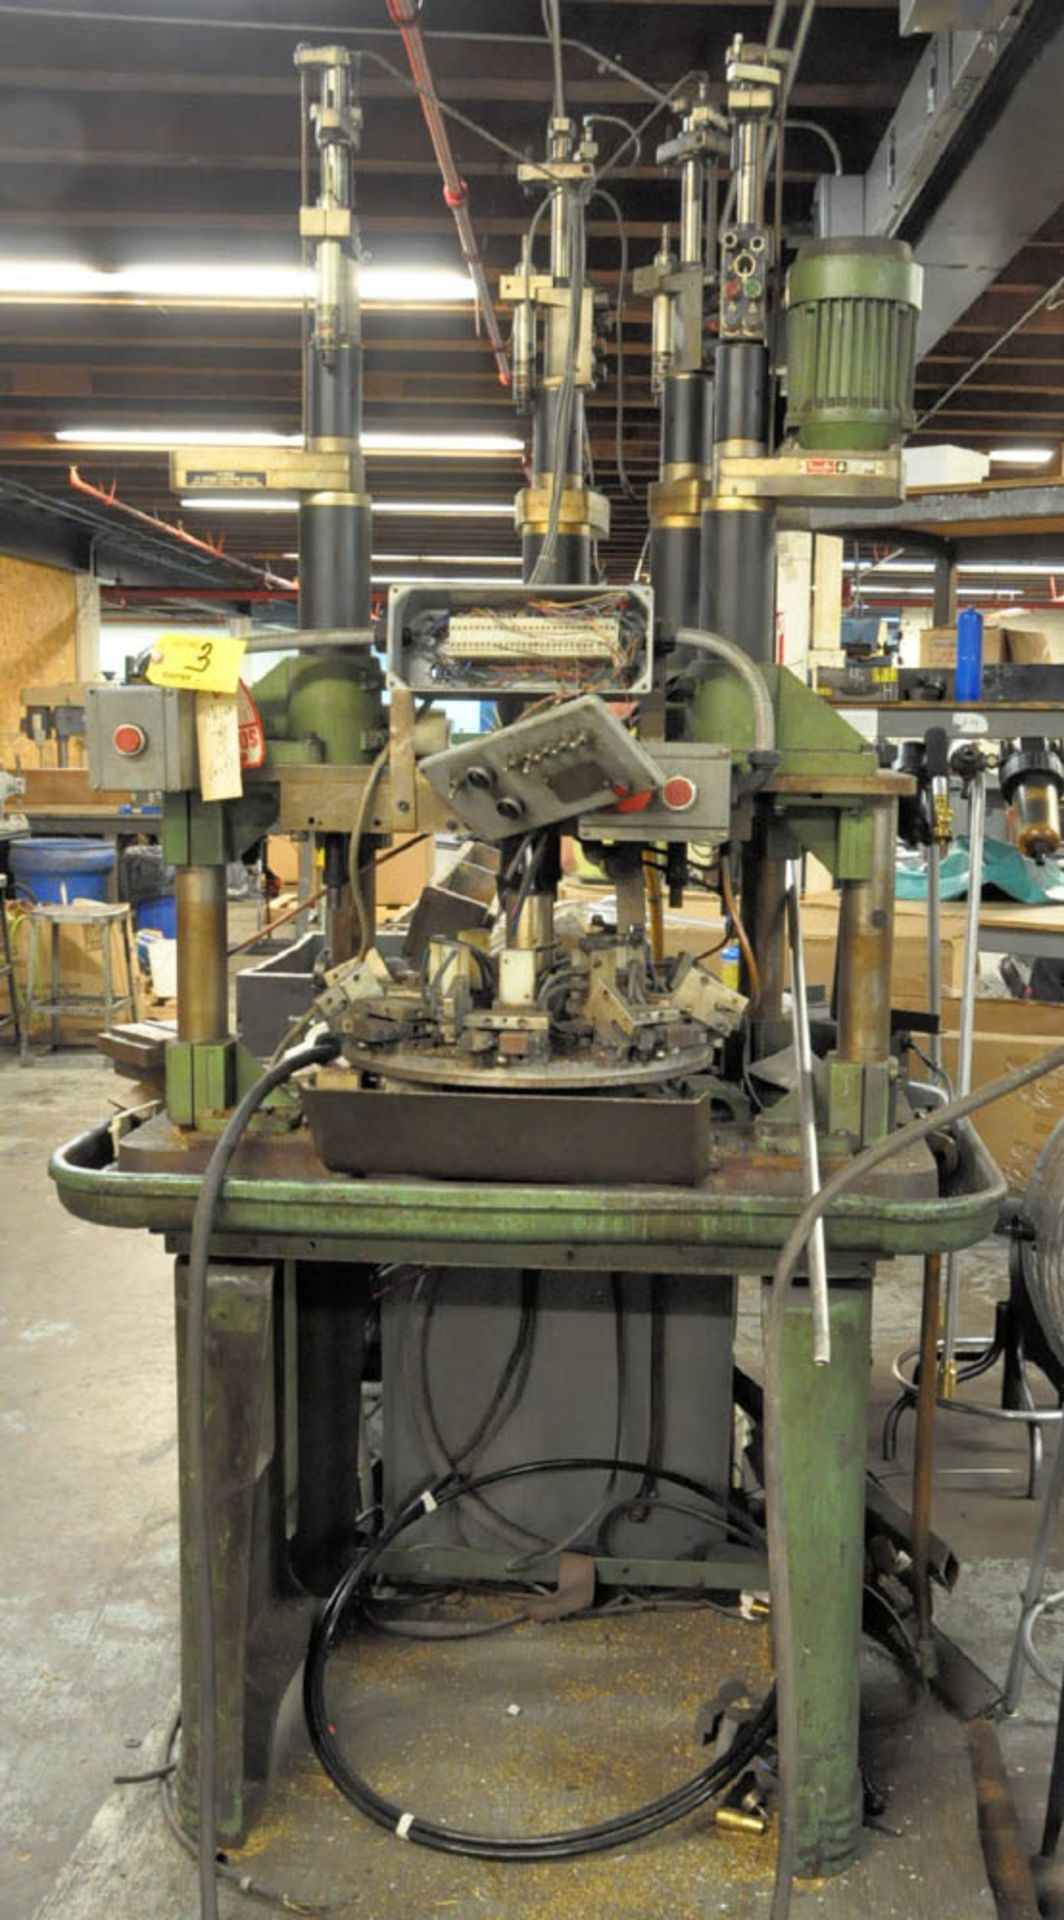 DESOUTTER 4-STATION DRILLING MACHINE (ONLY HAS 1 DRILL MOTOR), (NOT IN SERVICE), MACHINE TABLE